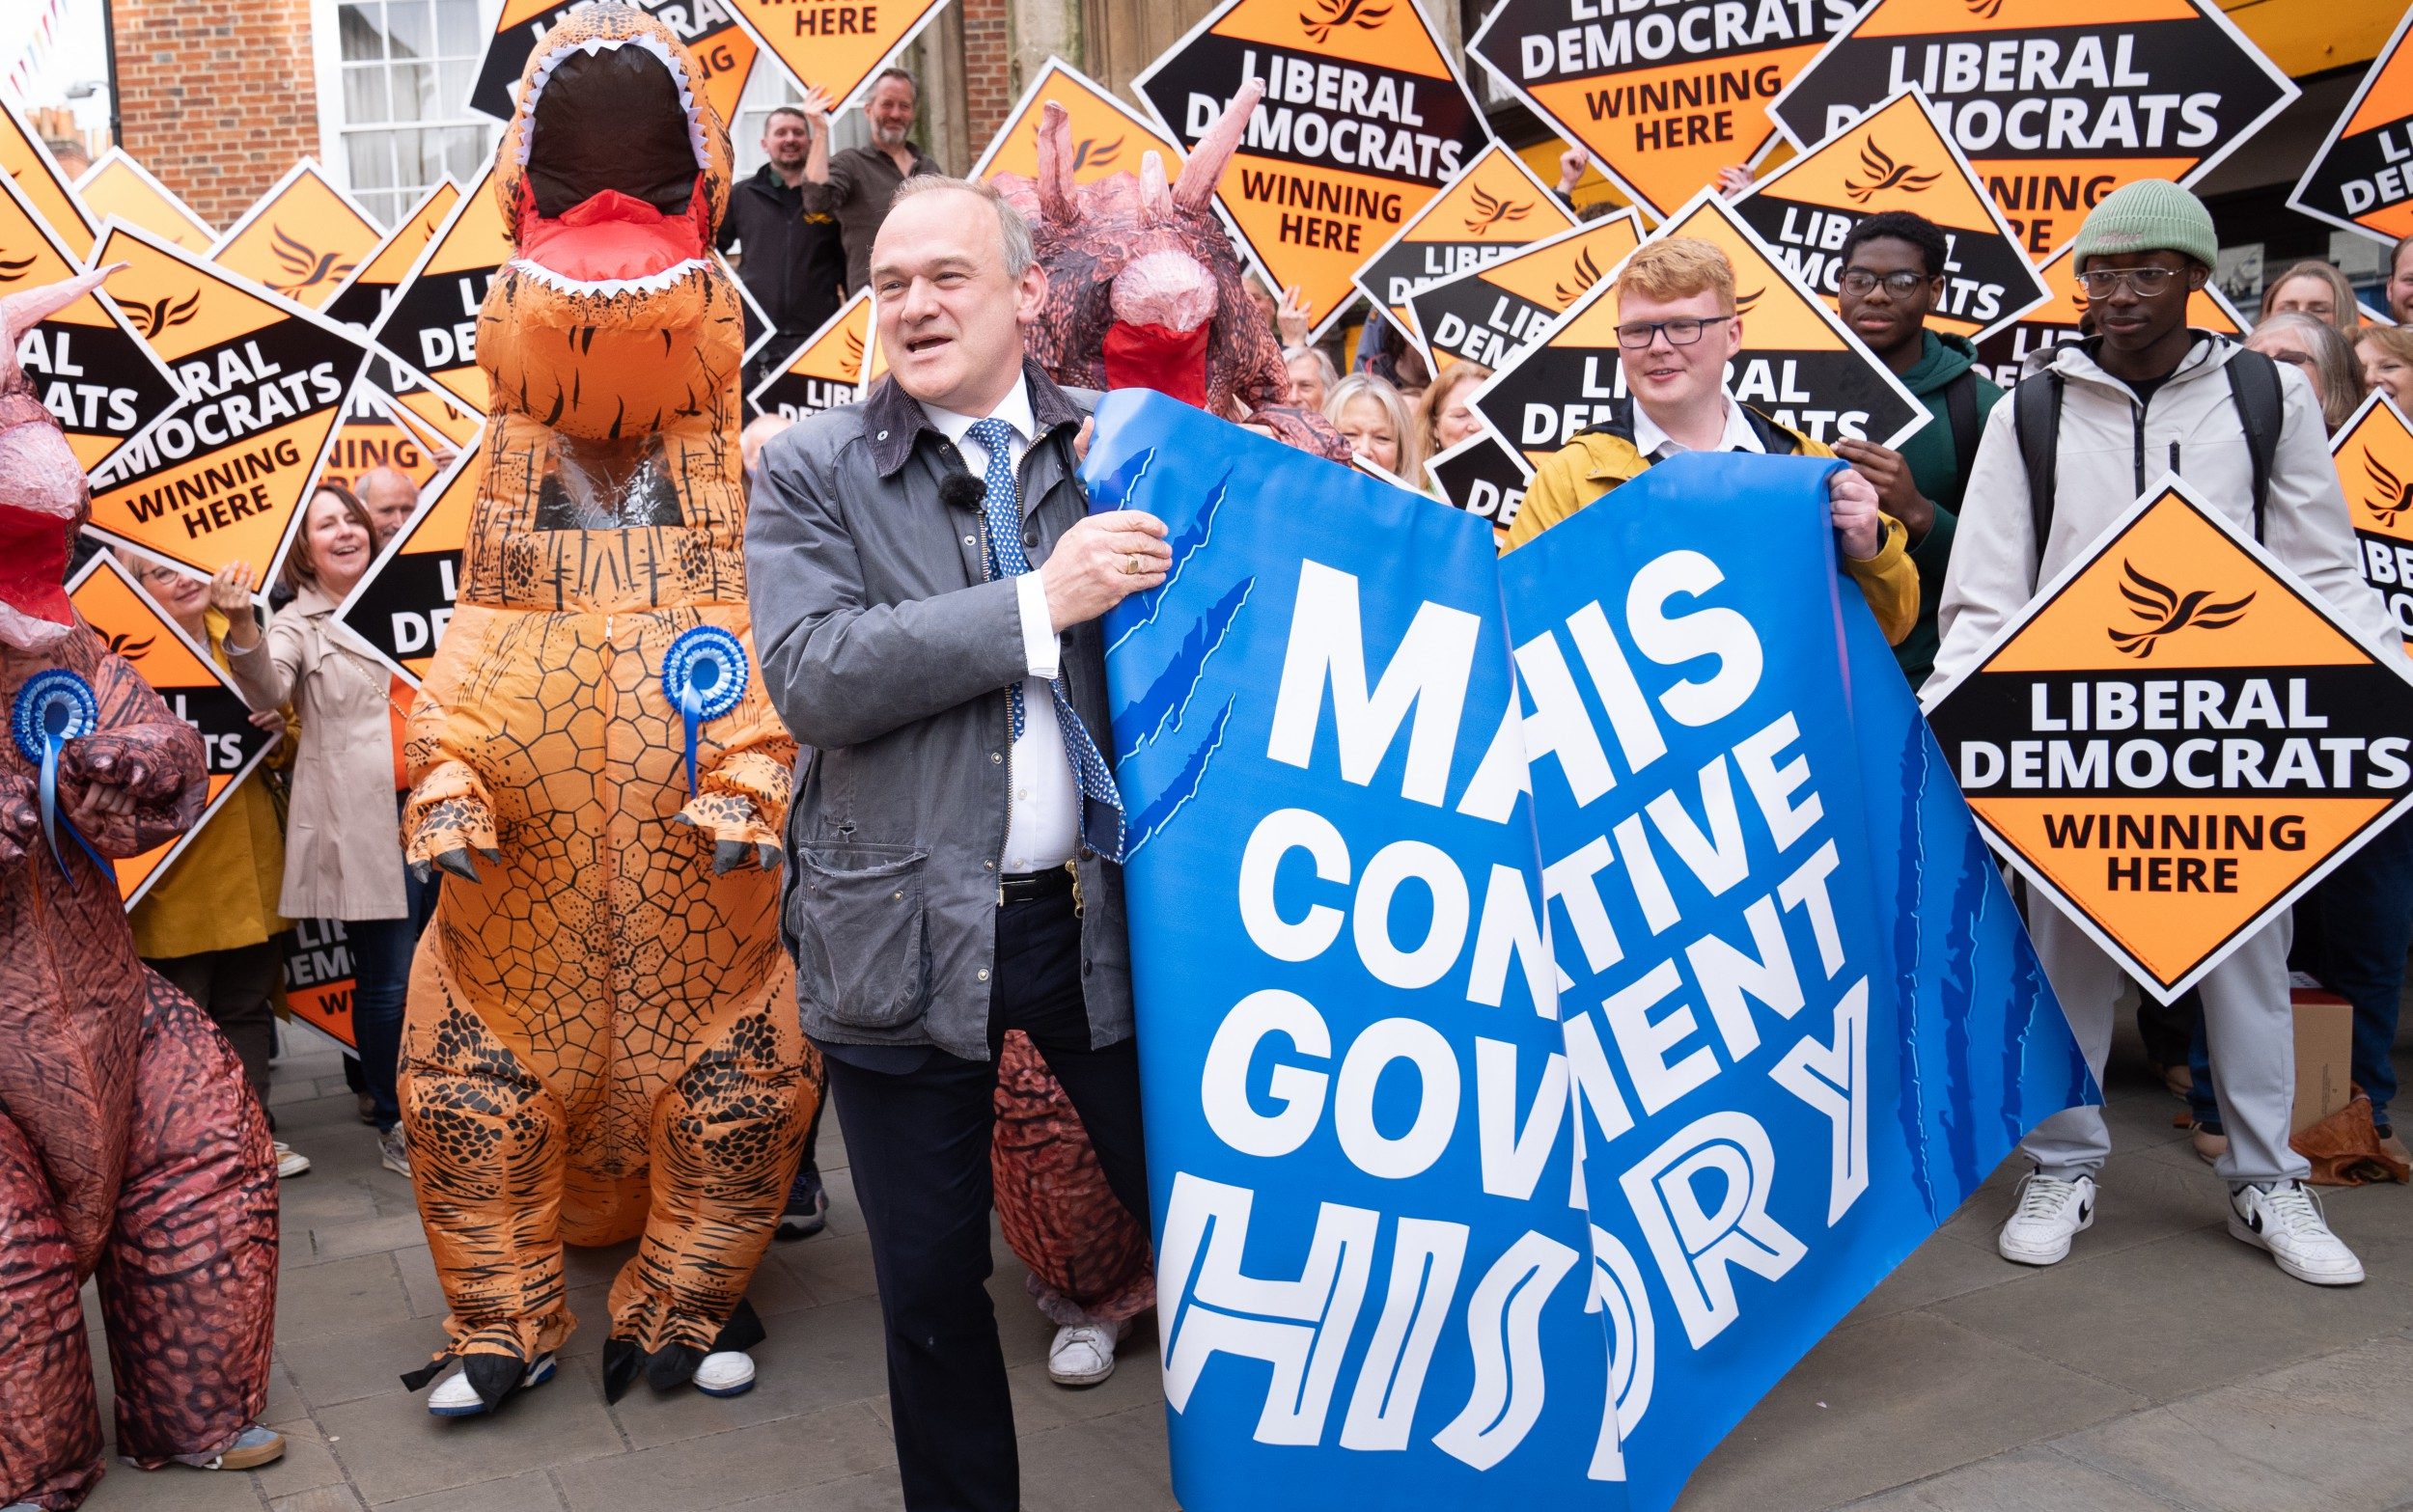 lib dem councillors outnumber tories for first time since 1996